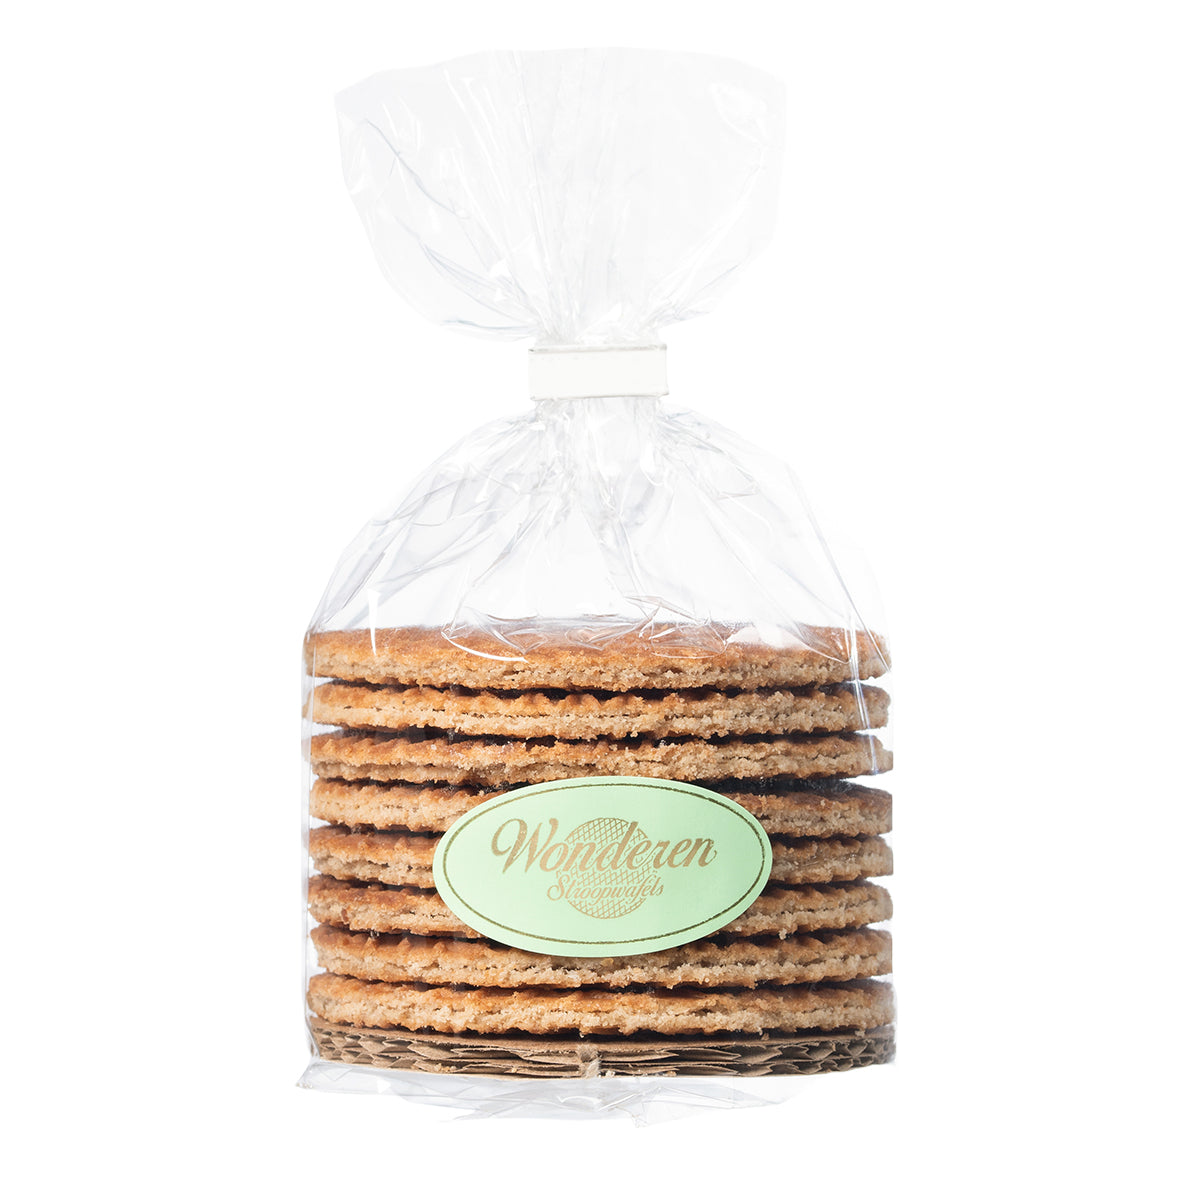 A stack of Wonderen Stroopwafels in a plastic bag on a white background.